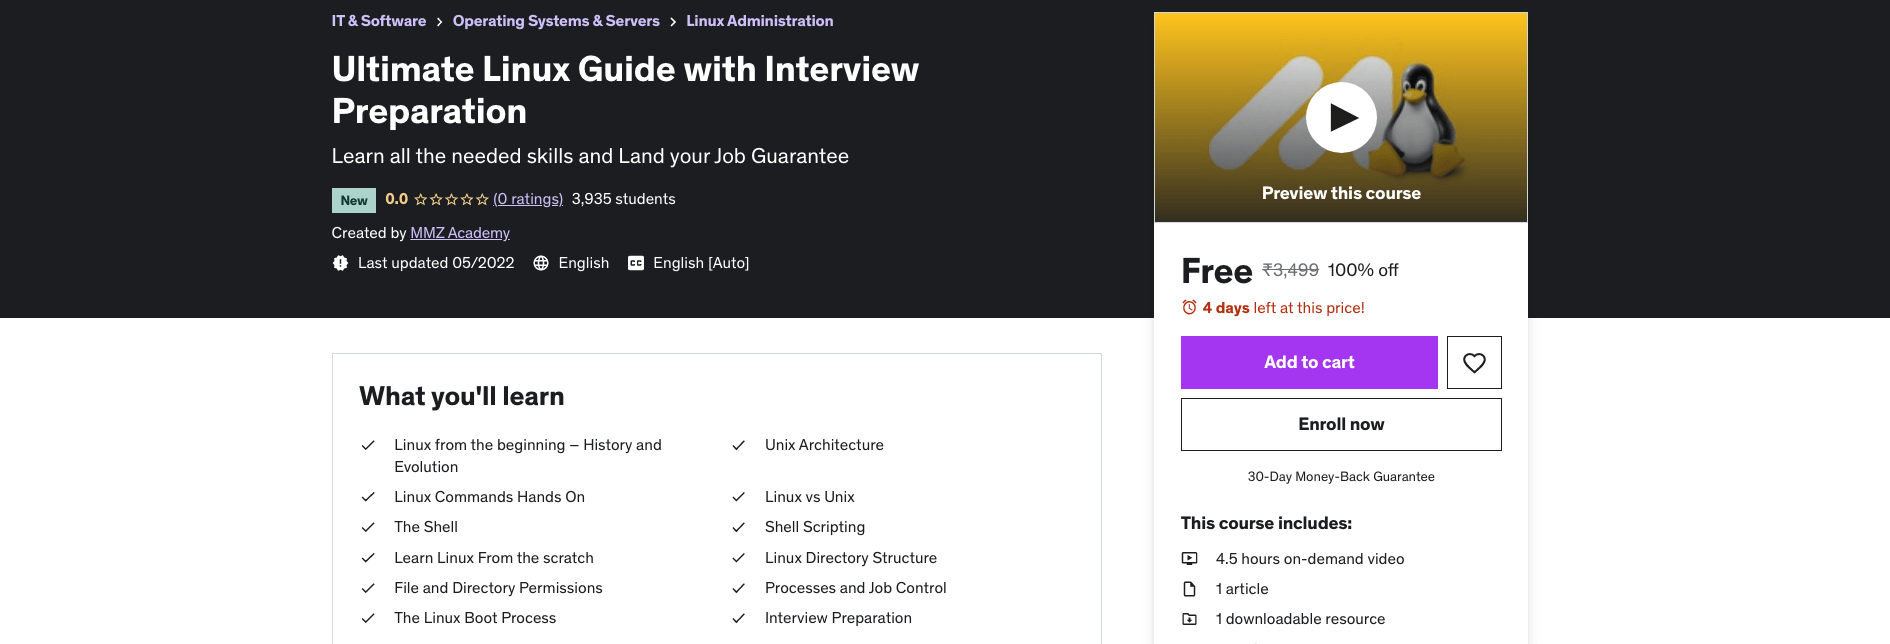 Ultimate Linux Guide with Interview Preparation